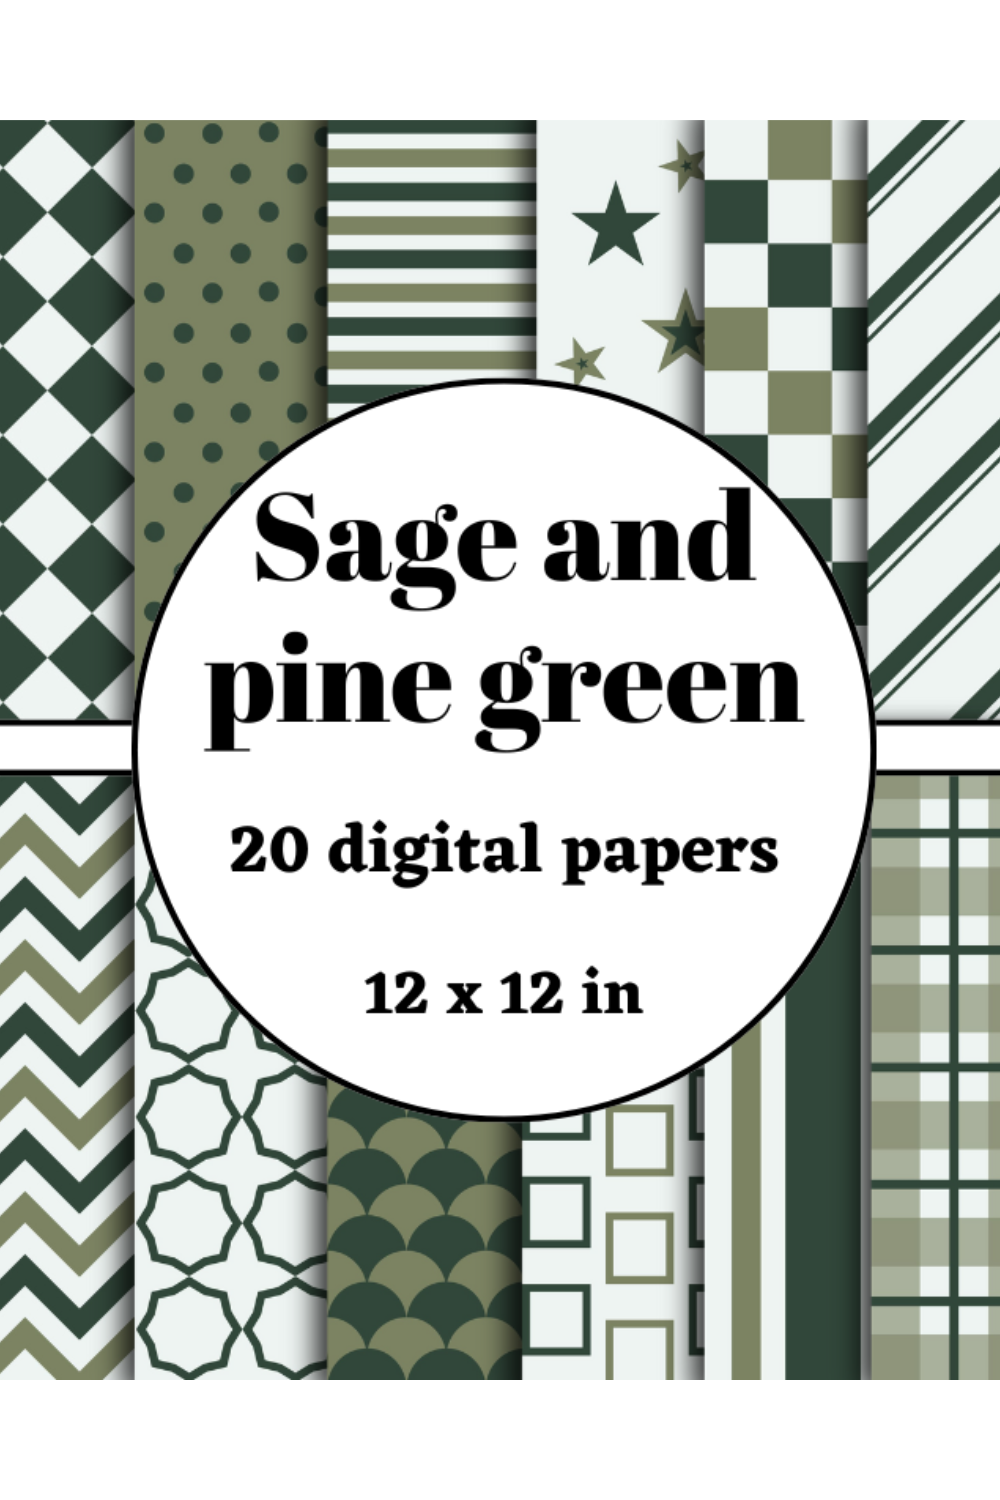 Sage and pine green digital papers pinterest preview image.